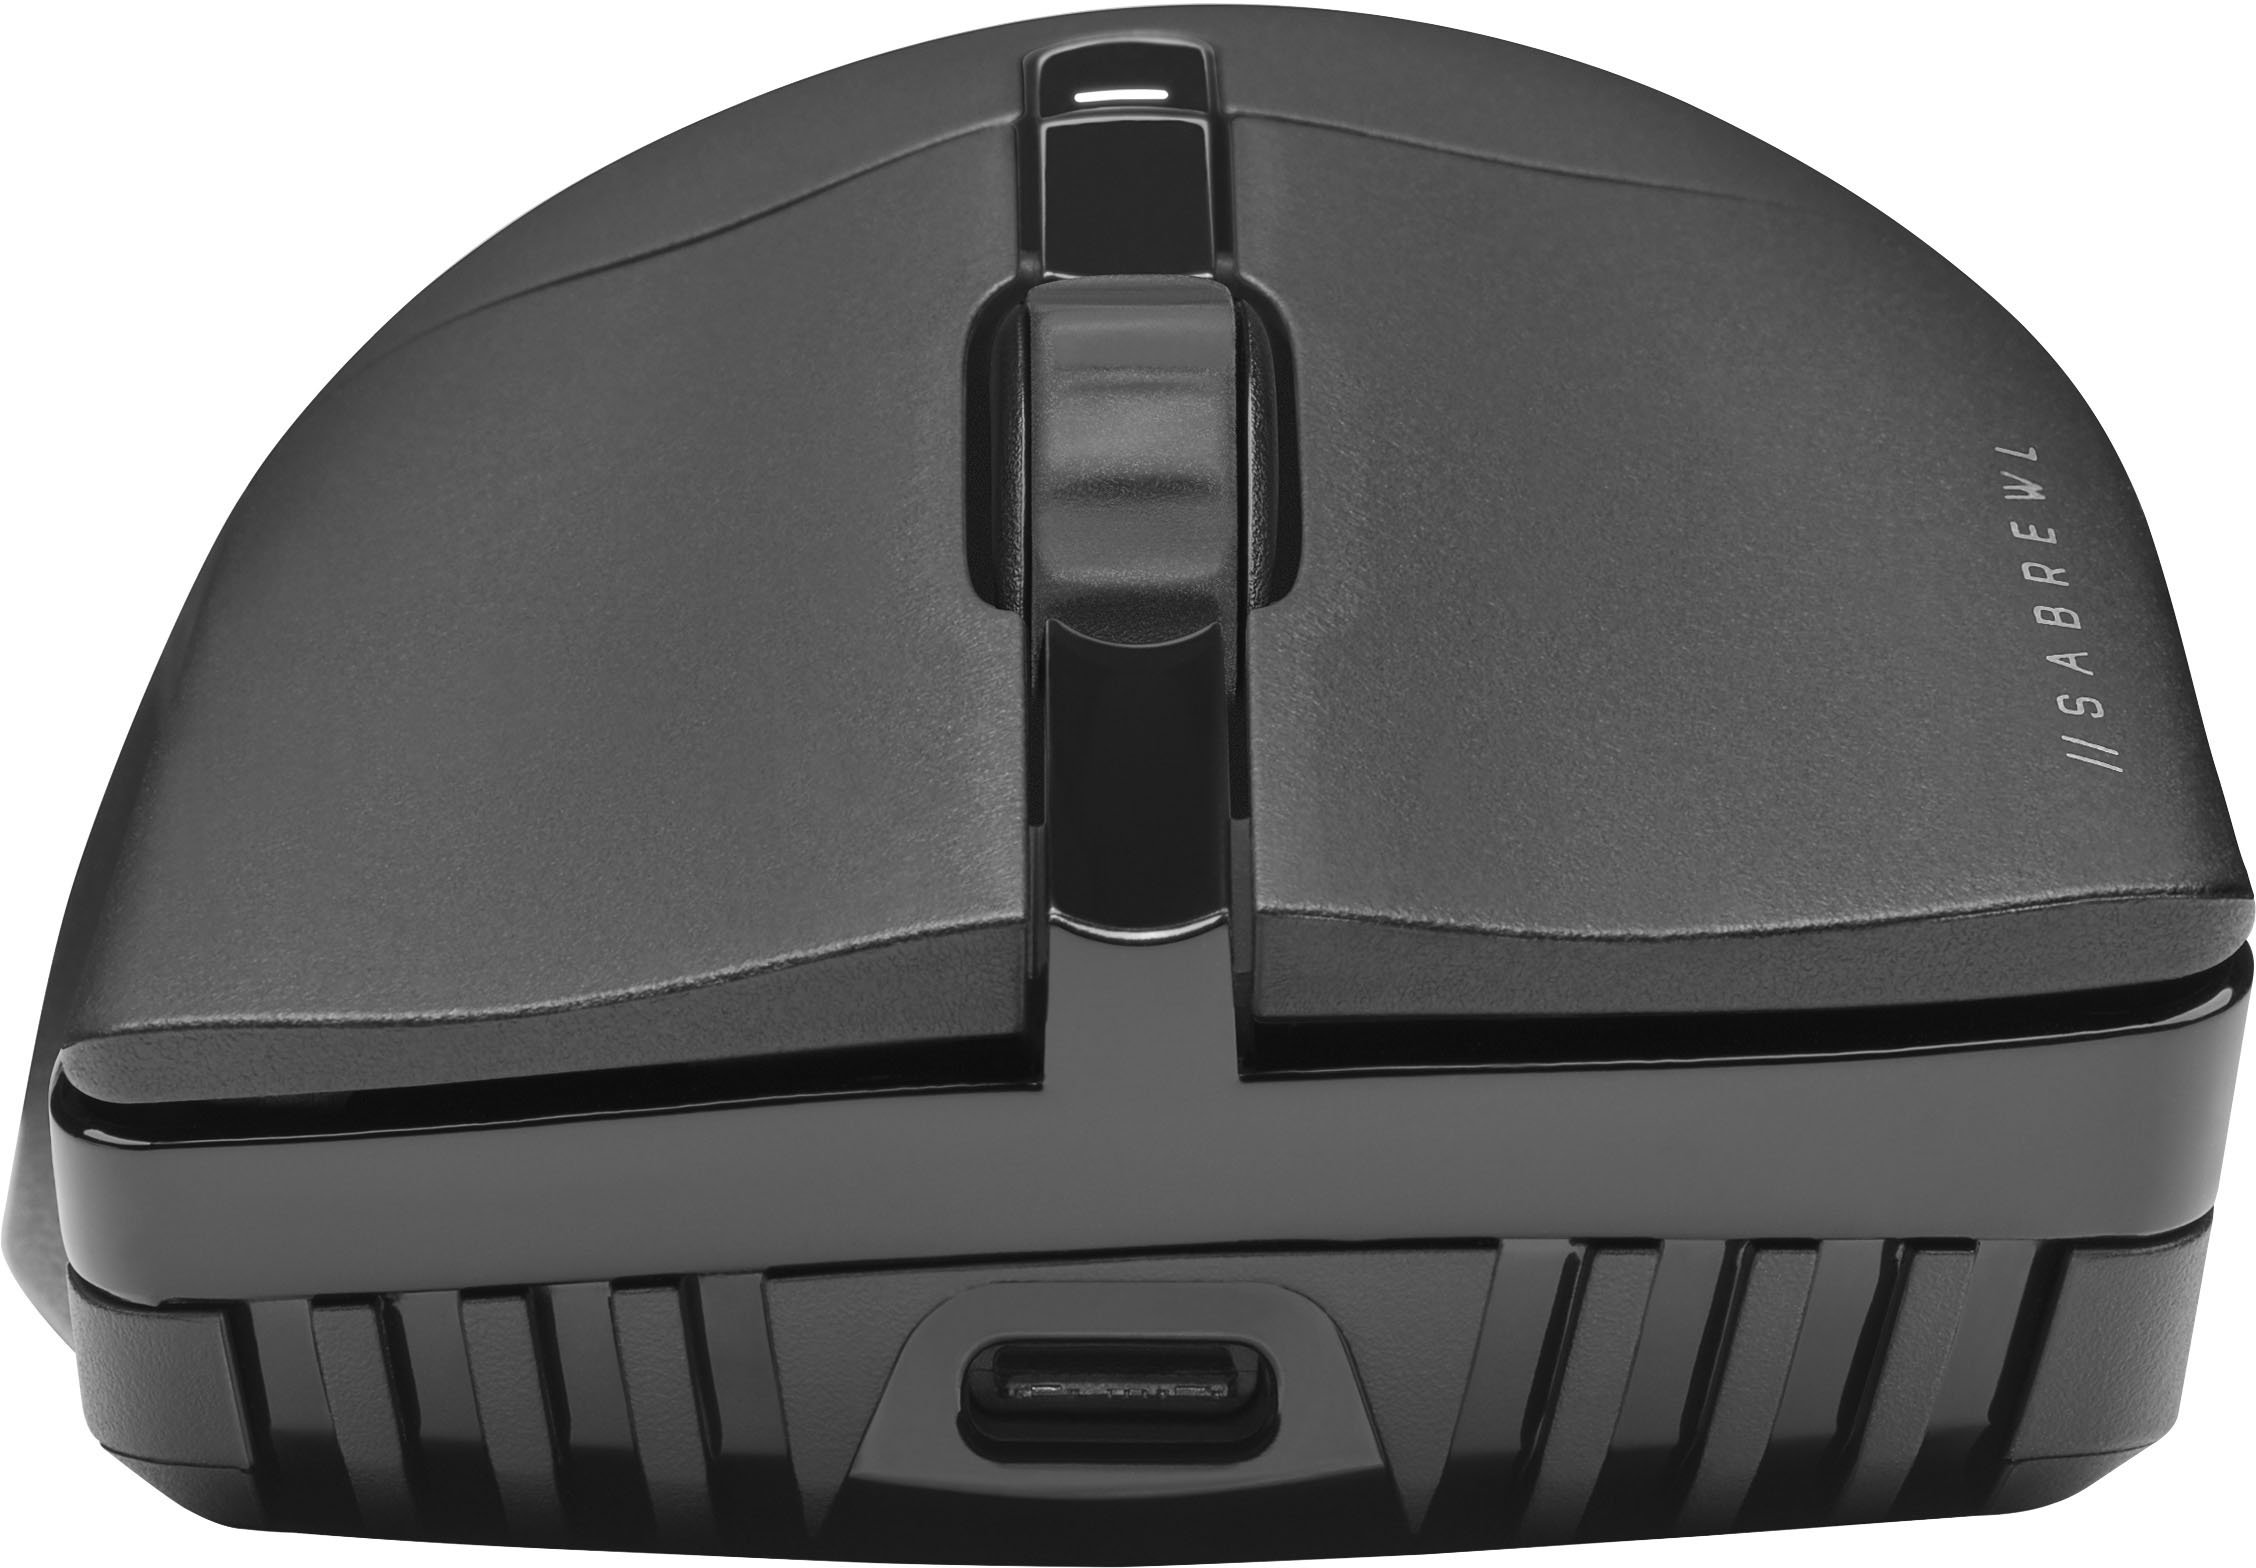 CORSAIR - CHAMPION SERIES SABRE RGB PRO Lightweight Wireless Optical Gaming  Mouse with 79g Ultra-lightweight design - Black